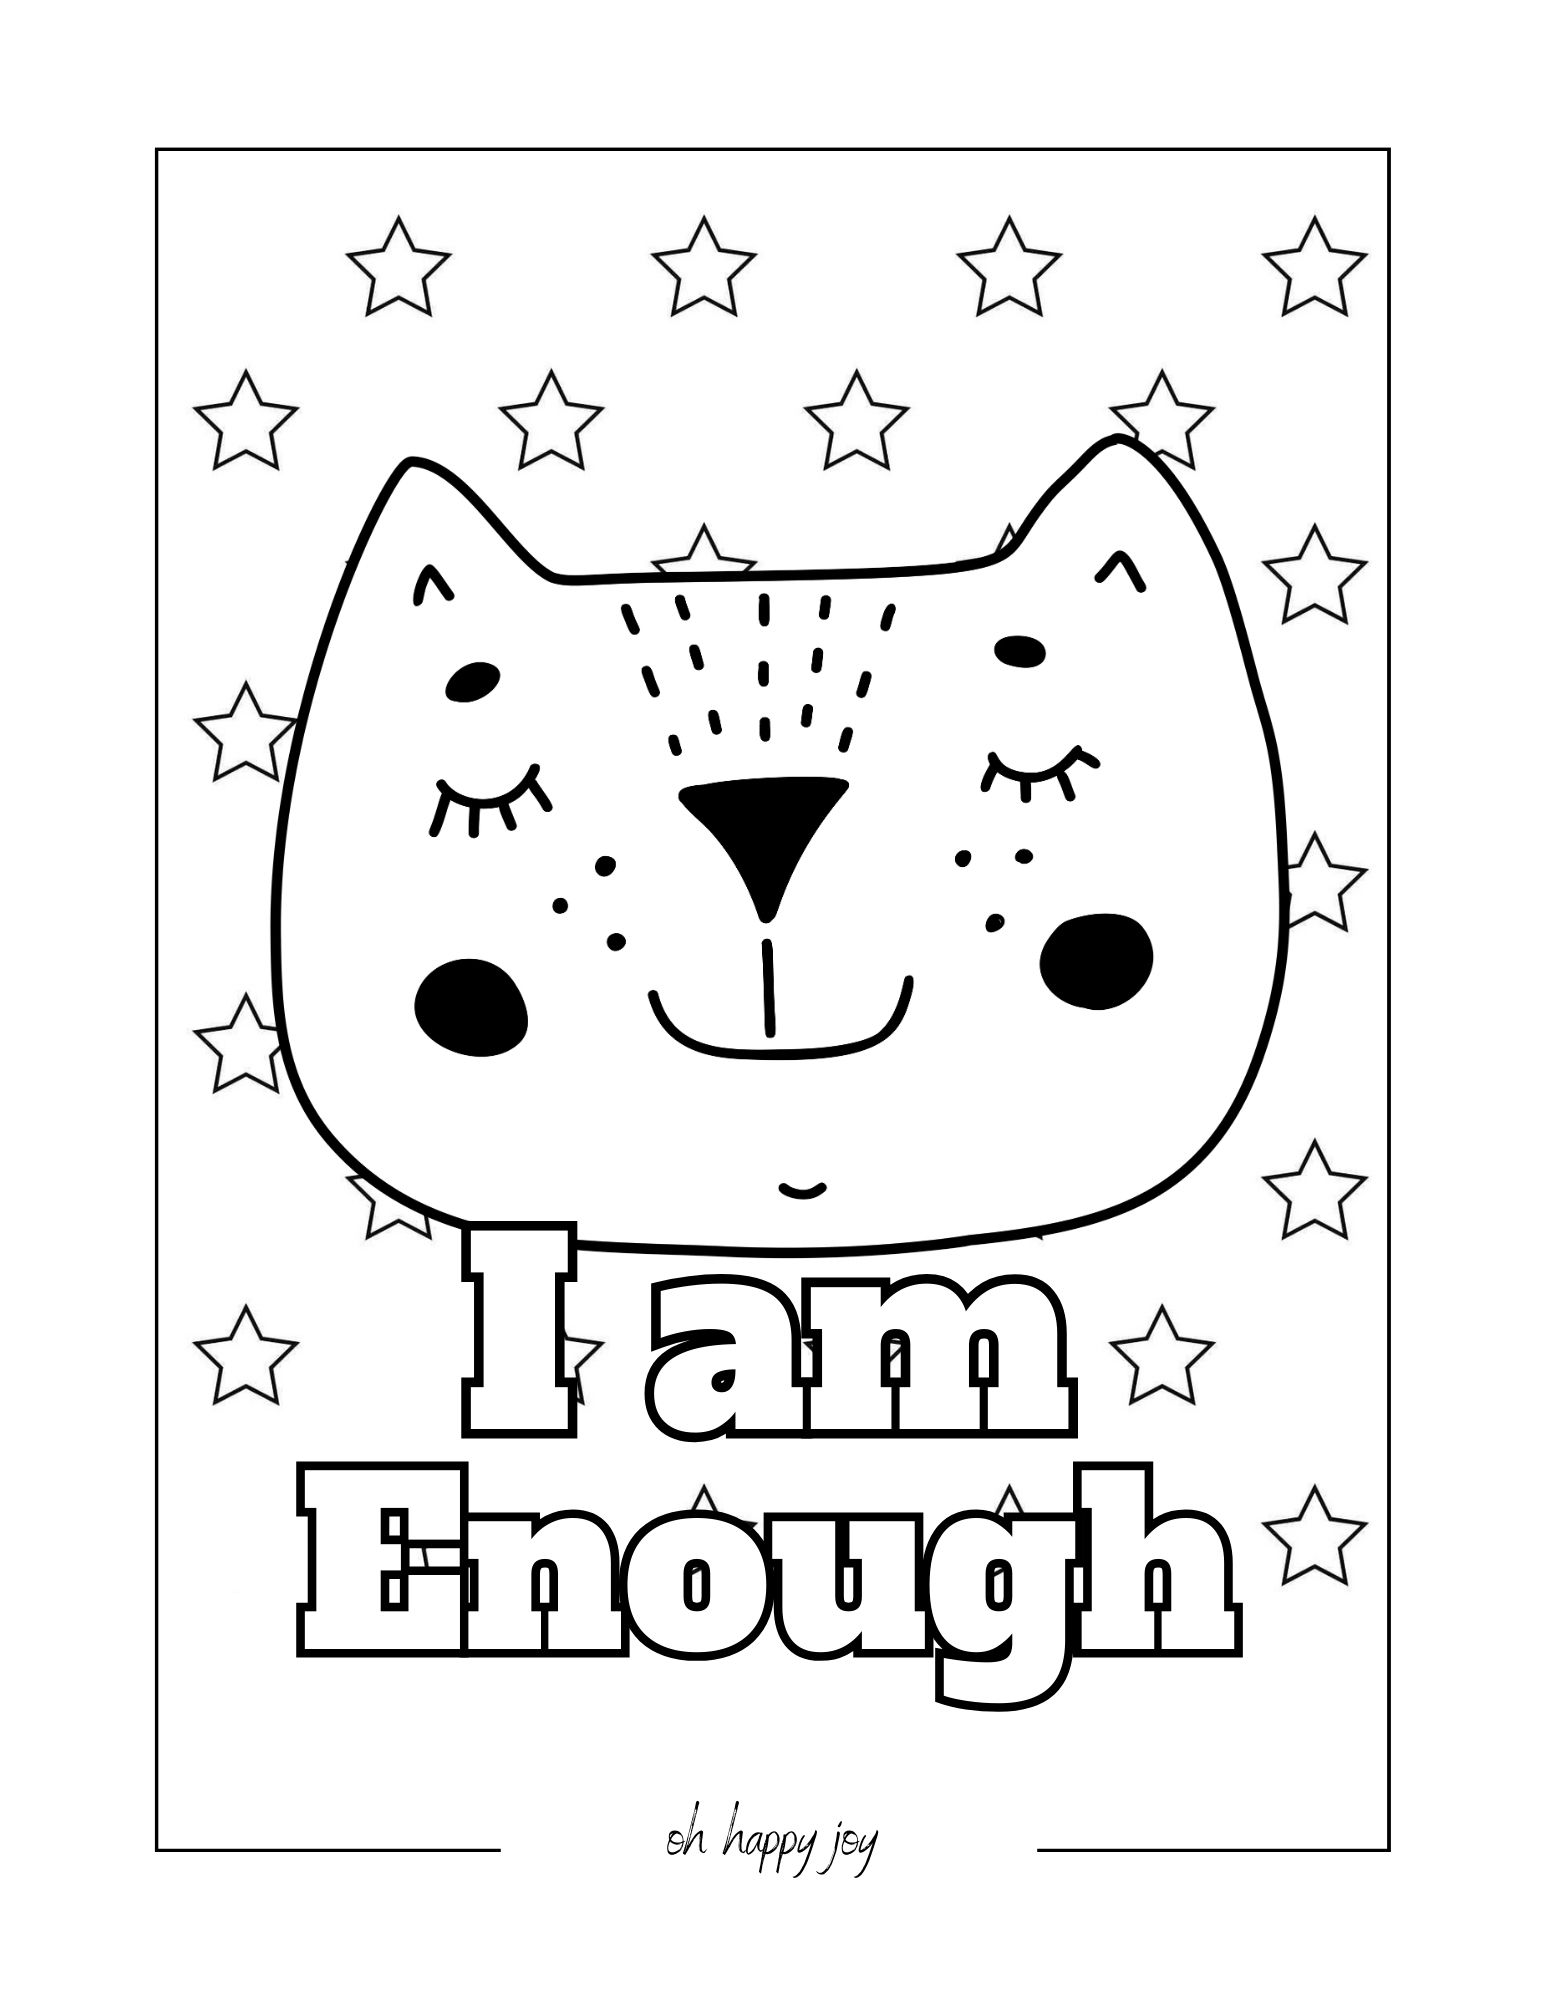 I am enough affirmation coloring page